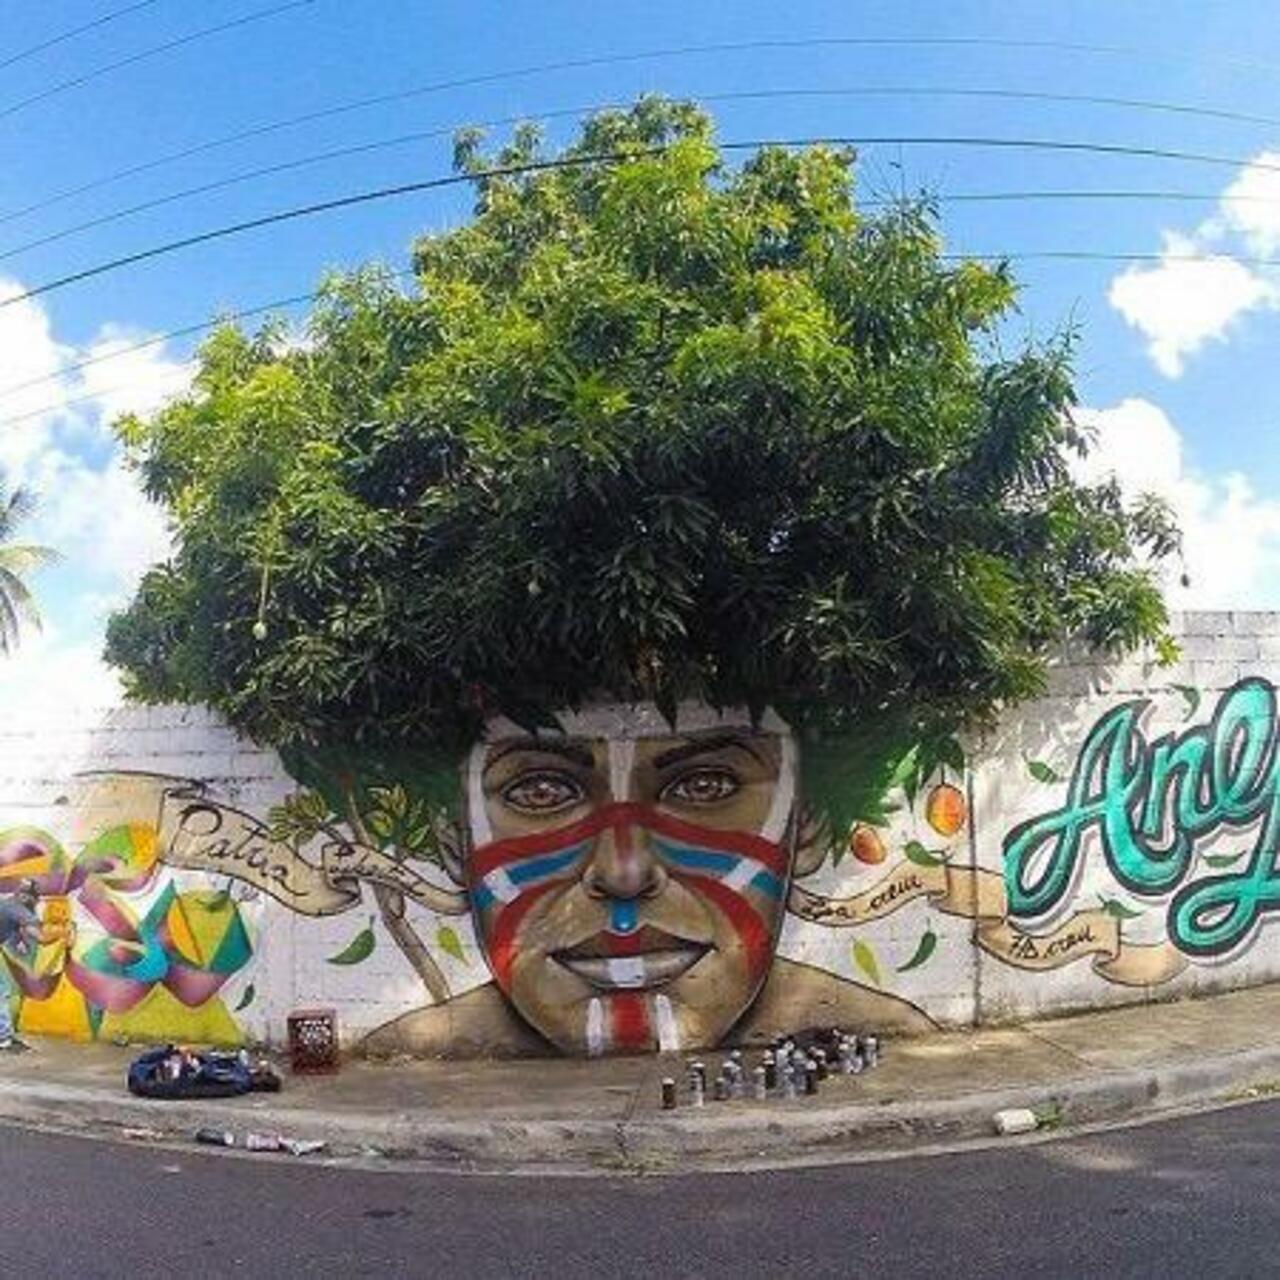 What if all graffiti looked like this? #cleanstreets #graffitibusters #graffiti #mural http://t.co/zMplnWWIrO